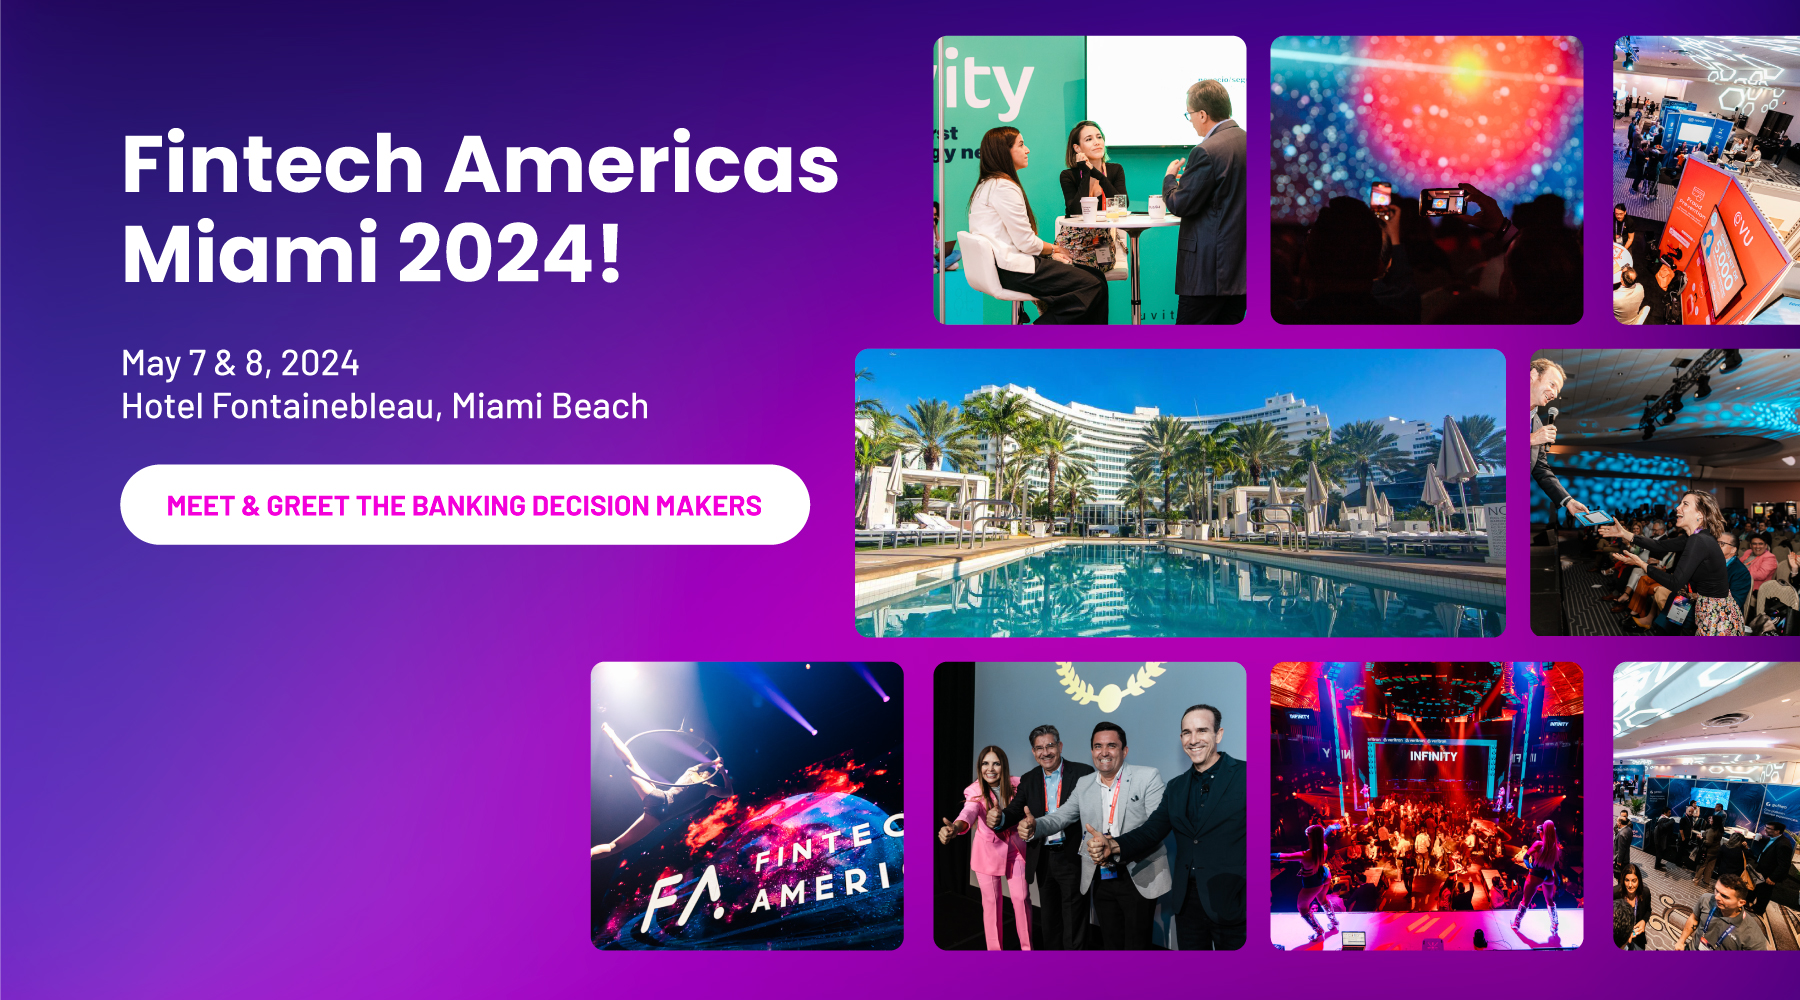 Fintech Americas Miami 2024! Meet & Greet the banking ecision makers